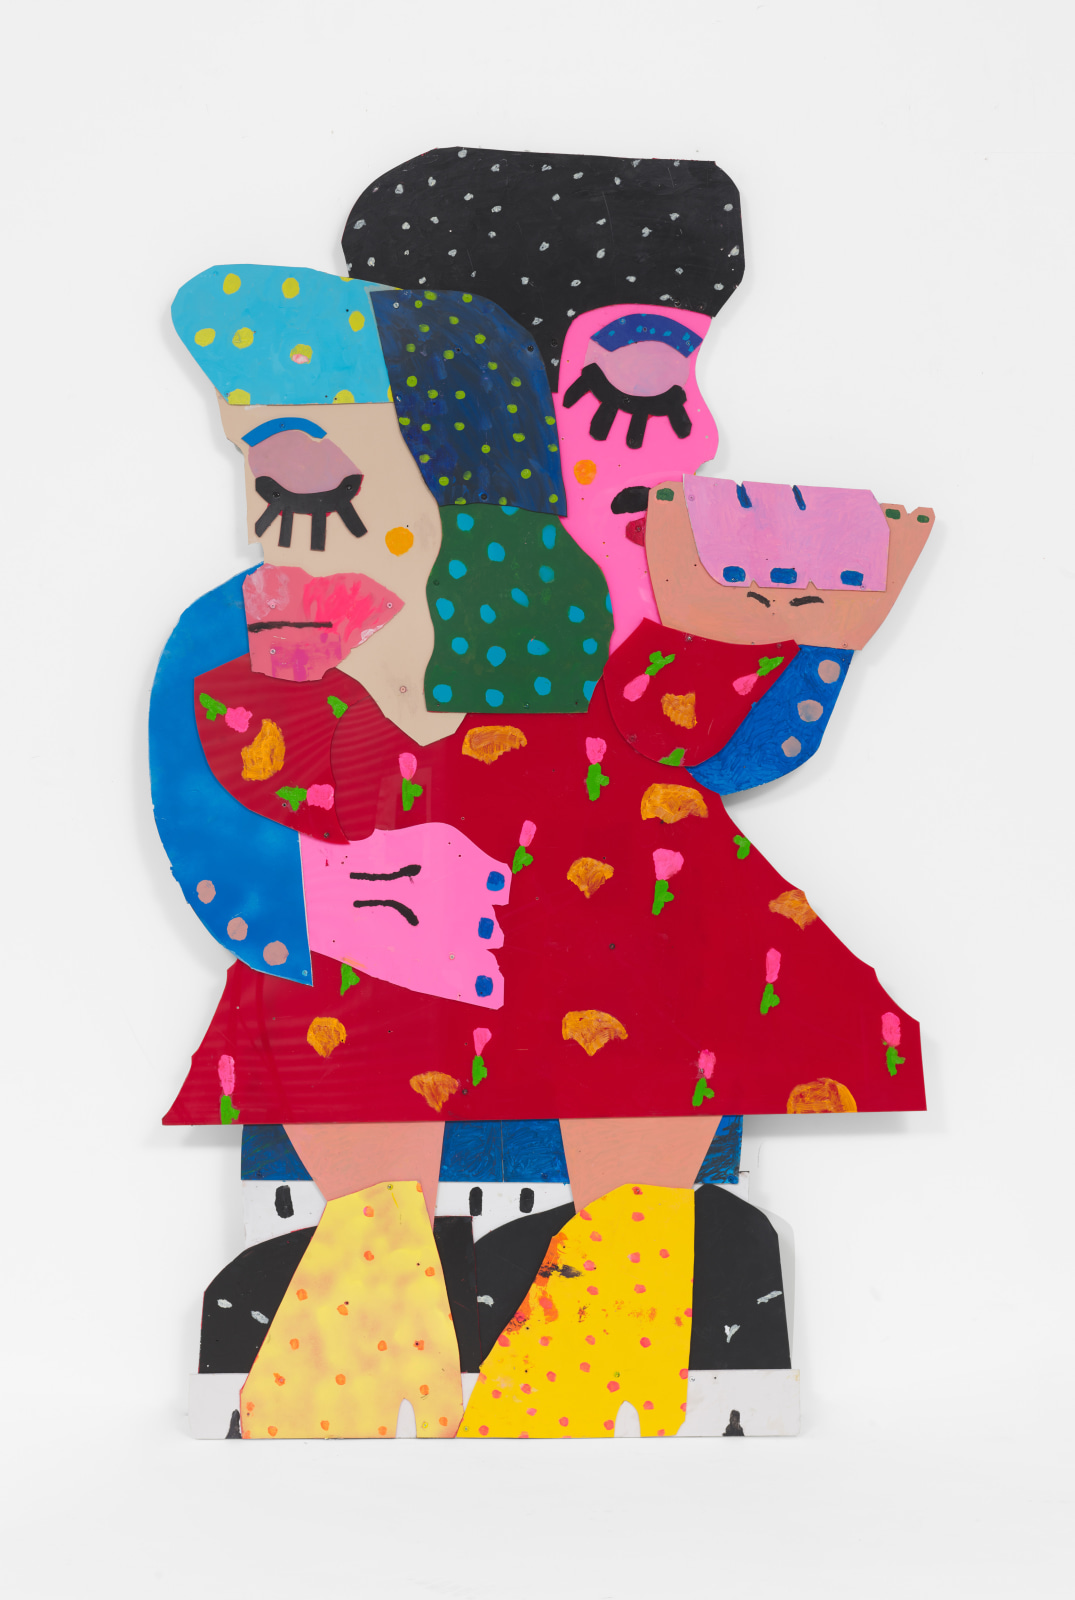 Sammy Binkow - Lovers at Large - Exhibitions - Simchowitz Gallery